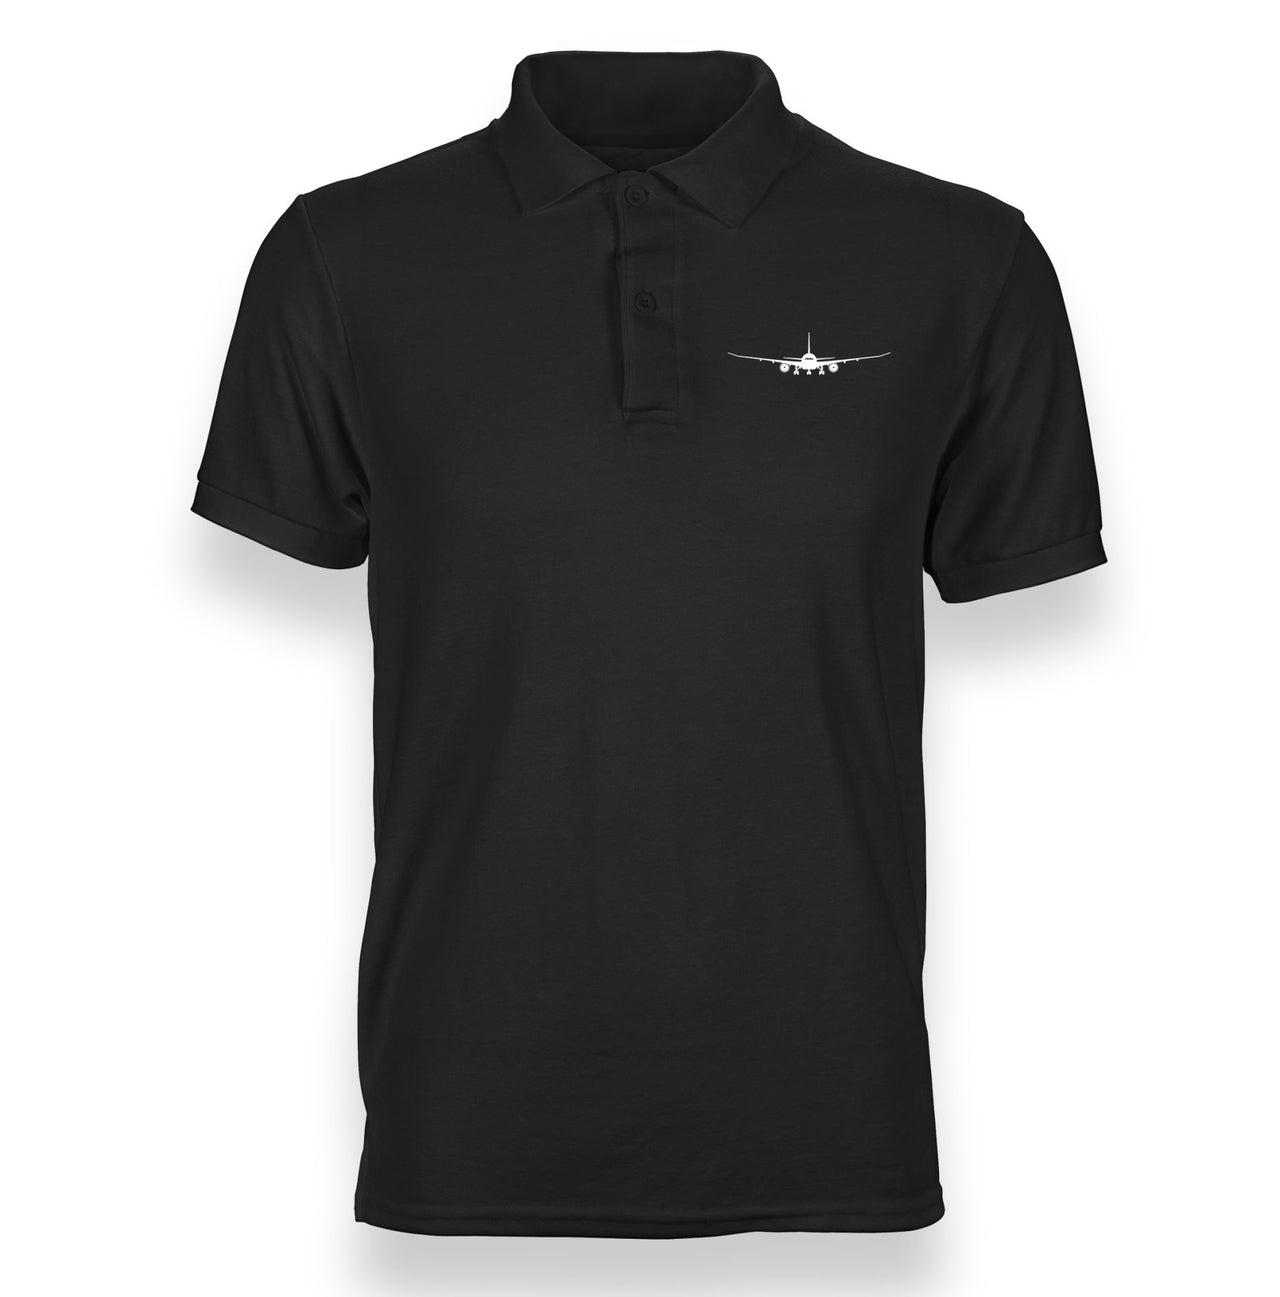 Boeing 787 Silhouette Designed "WOMEN" Polo T-Shirts